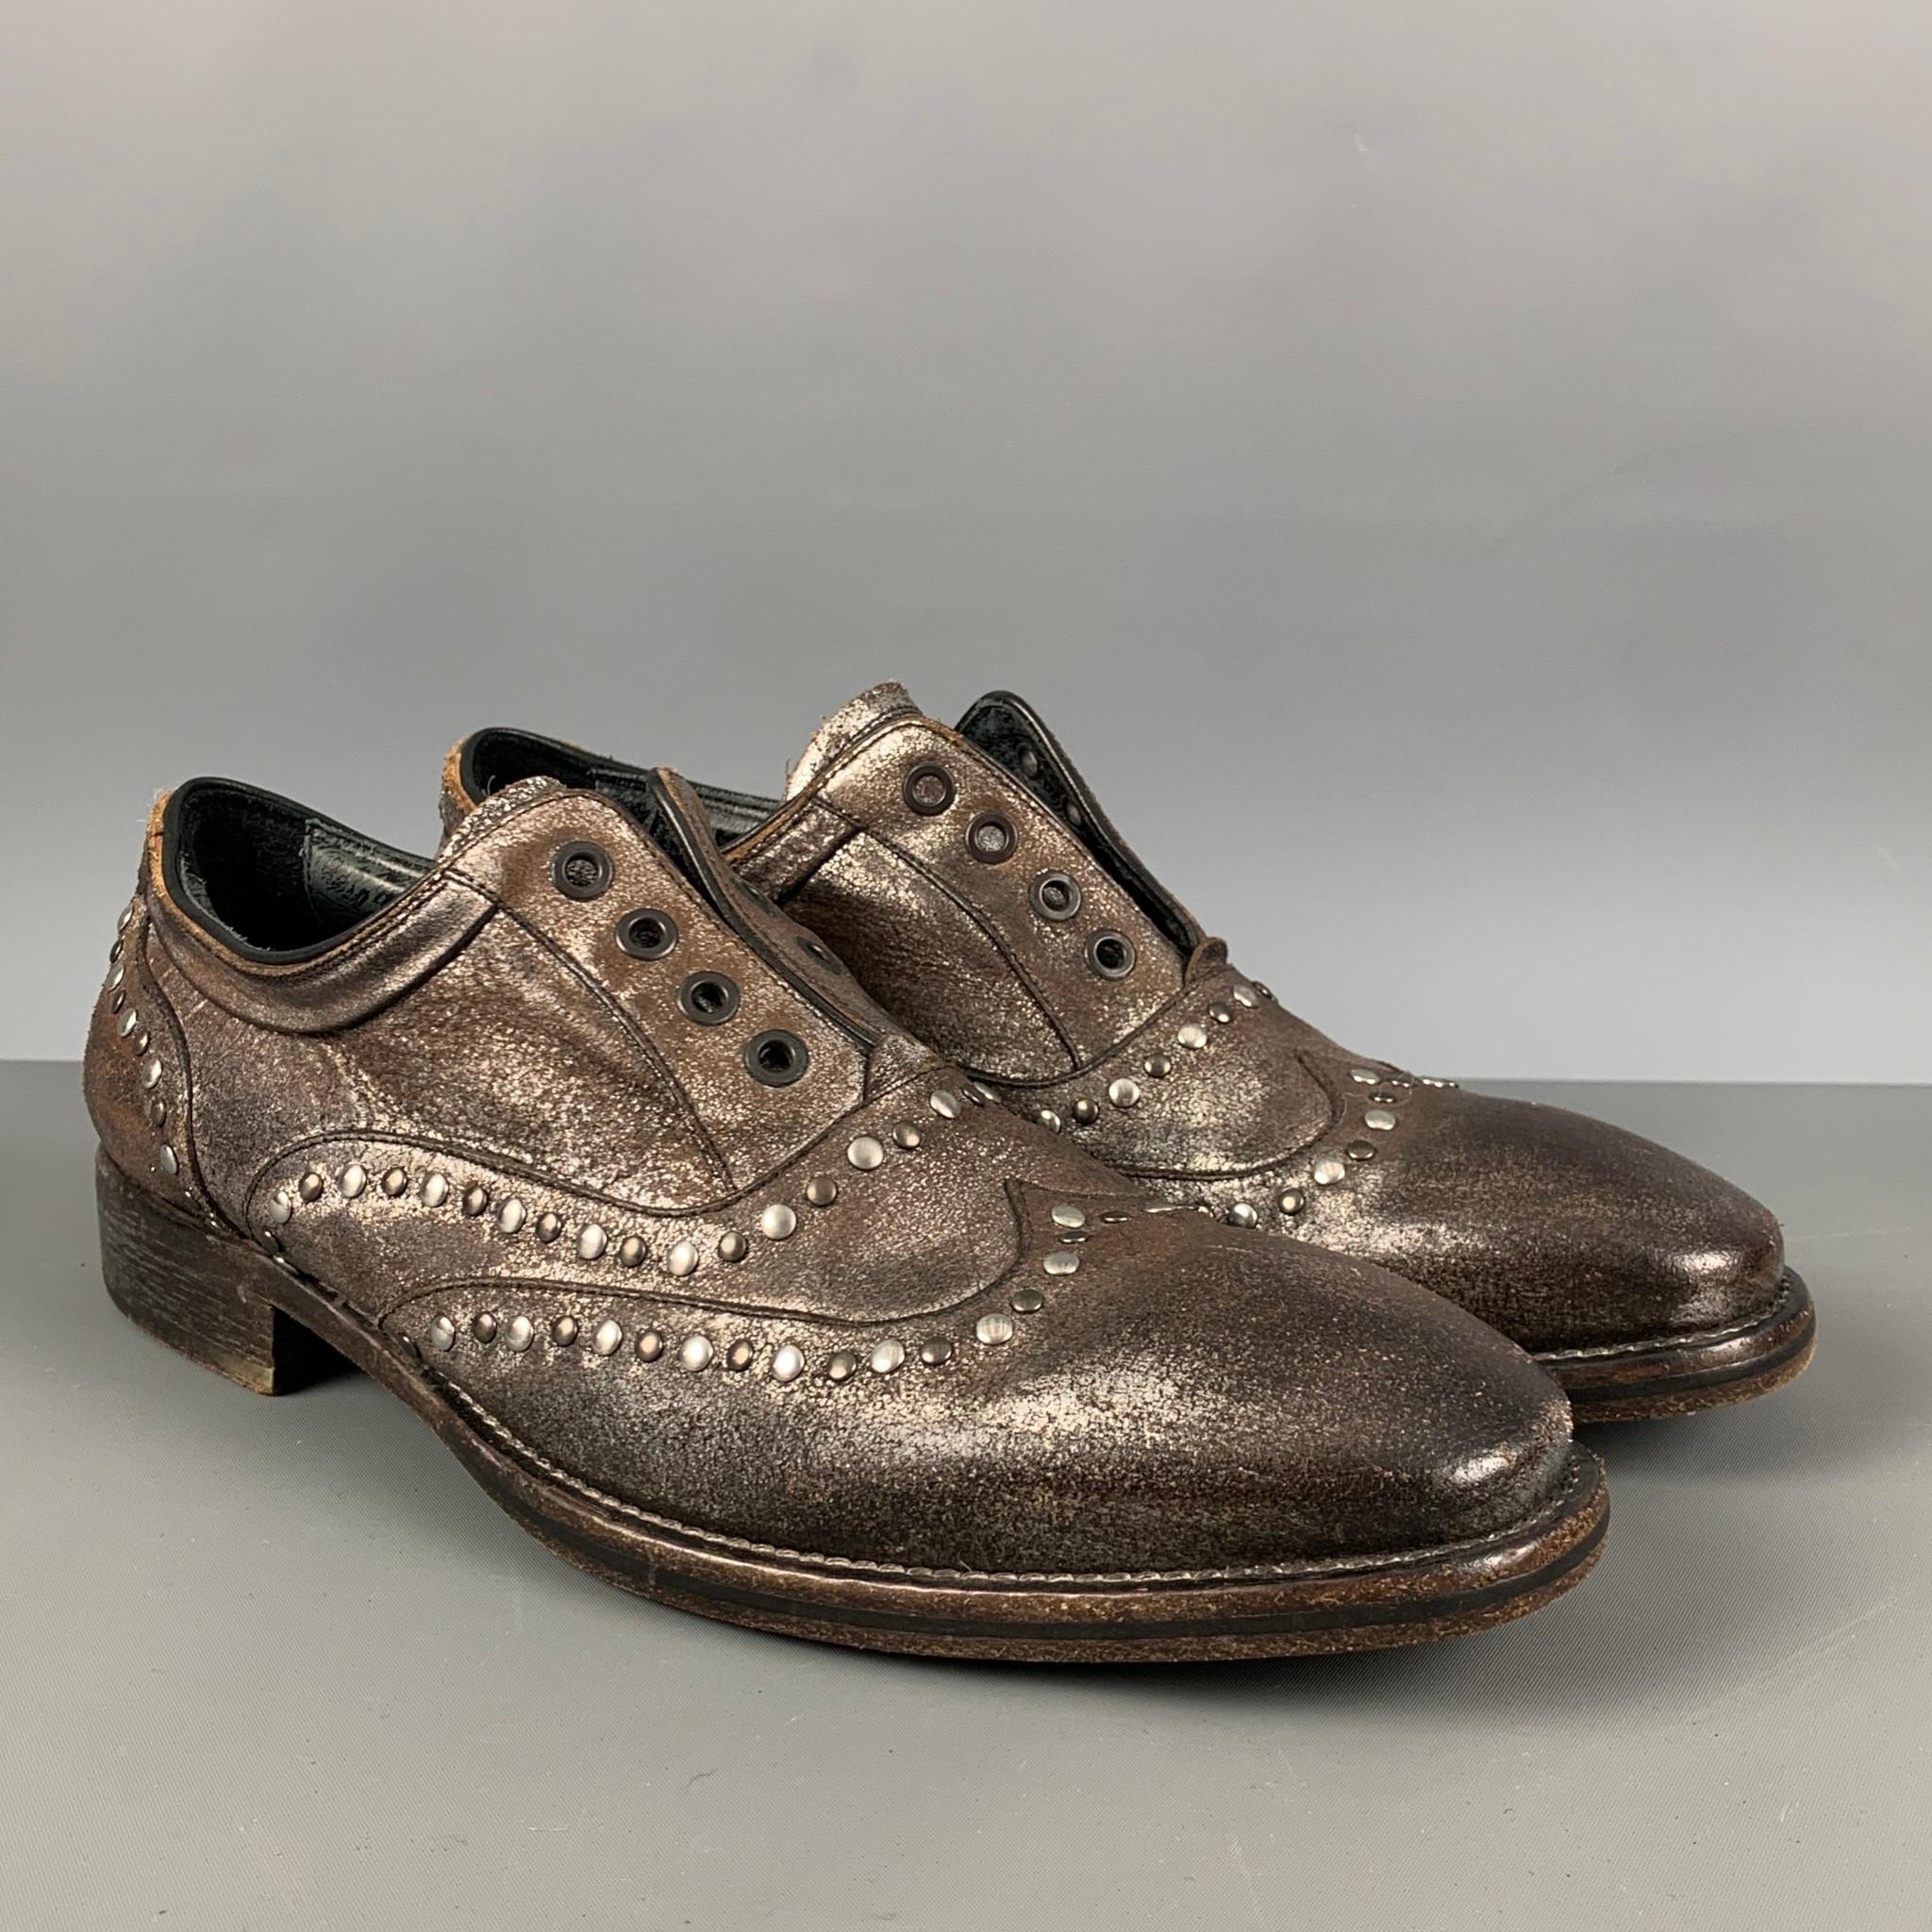 JOHN VARVATOS 'Antique' loafers comes in a brown leather featuring a distressed look, silver details, and a lace up style. Made in Italy.

Very Good Pre-Owned Condition.
Marked: F2744R1 Y784 019 9

Outsole: 12 in. x 4.25 in.  

SKU: 124779
Category: